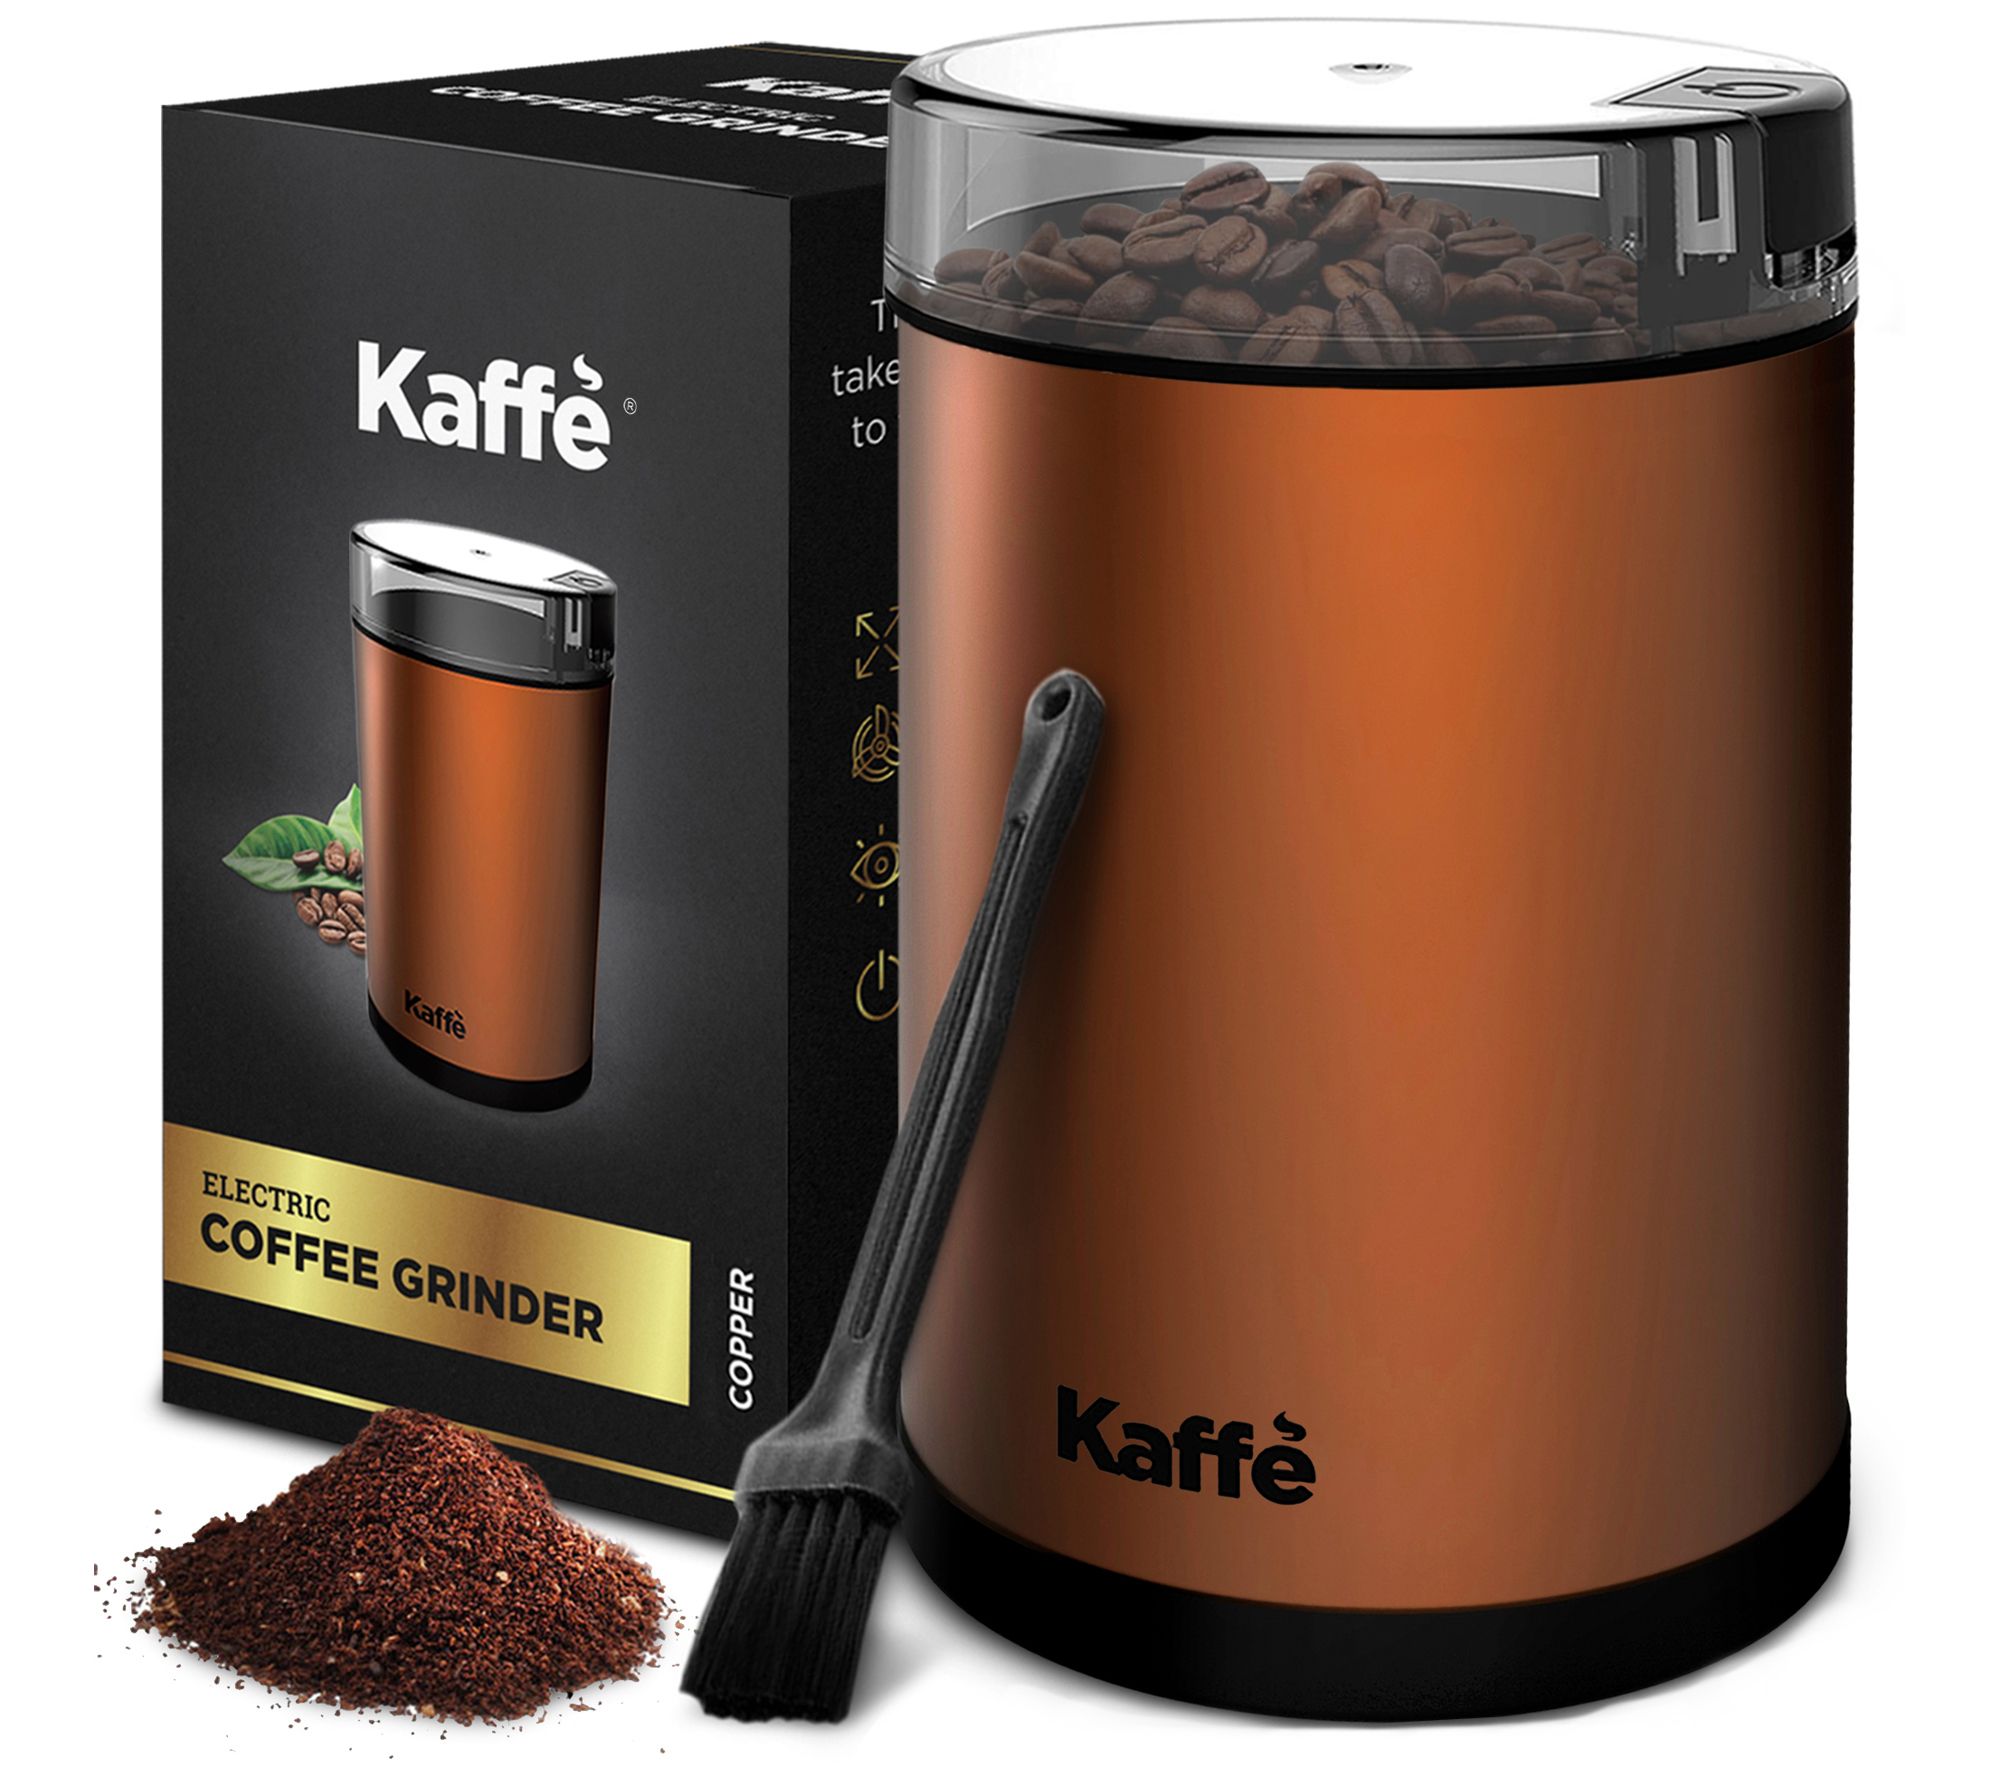 Kaffe Electric Burr Coffee Grinder Stainless Steel - 5.5 oz